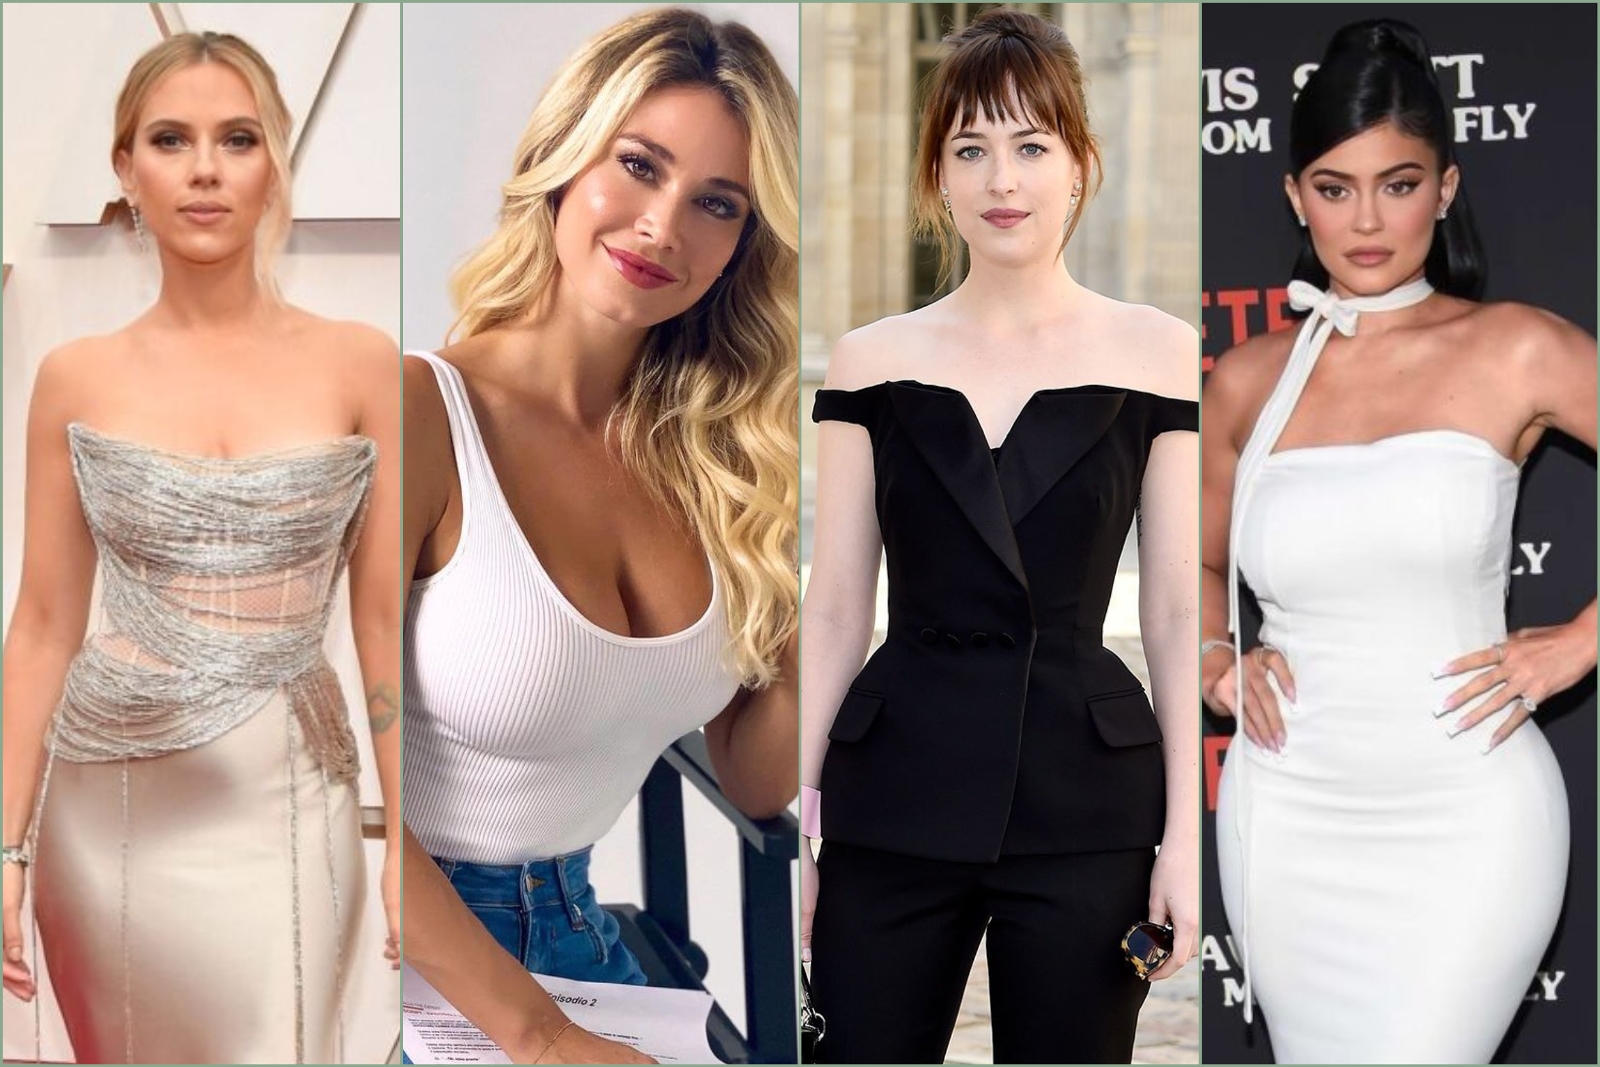 Top 10 Women with the Most Attractive Figure 2021 - Top 10 About